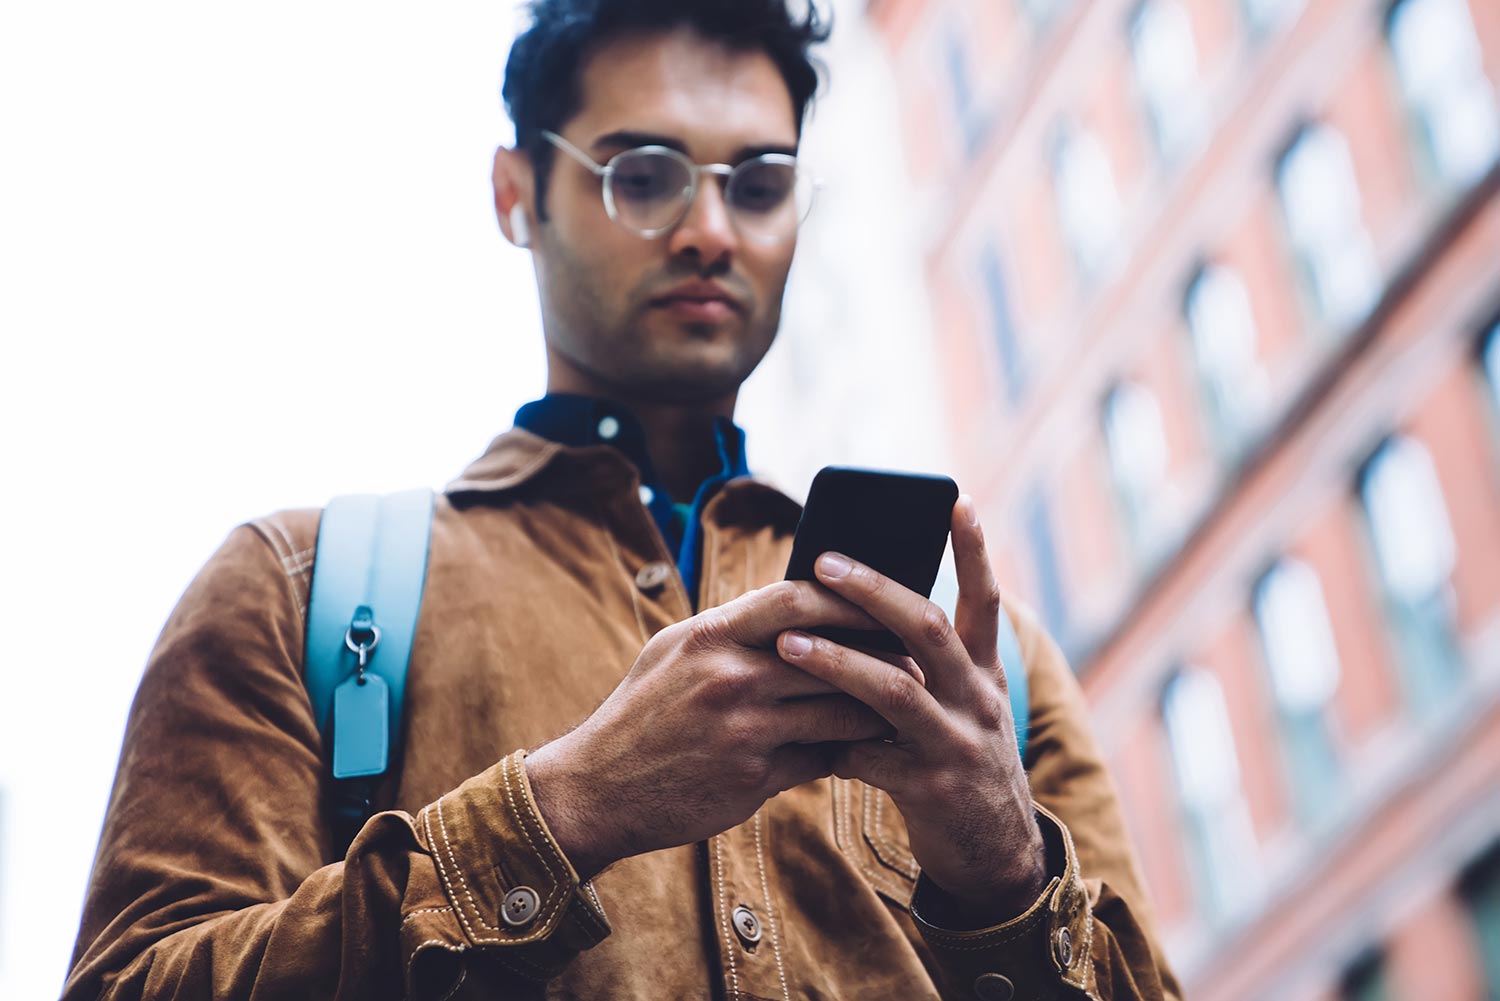 Indian man walking in the city with glasses looking down at his phone in his hands.